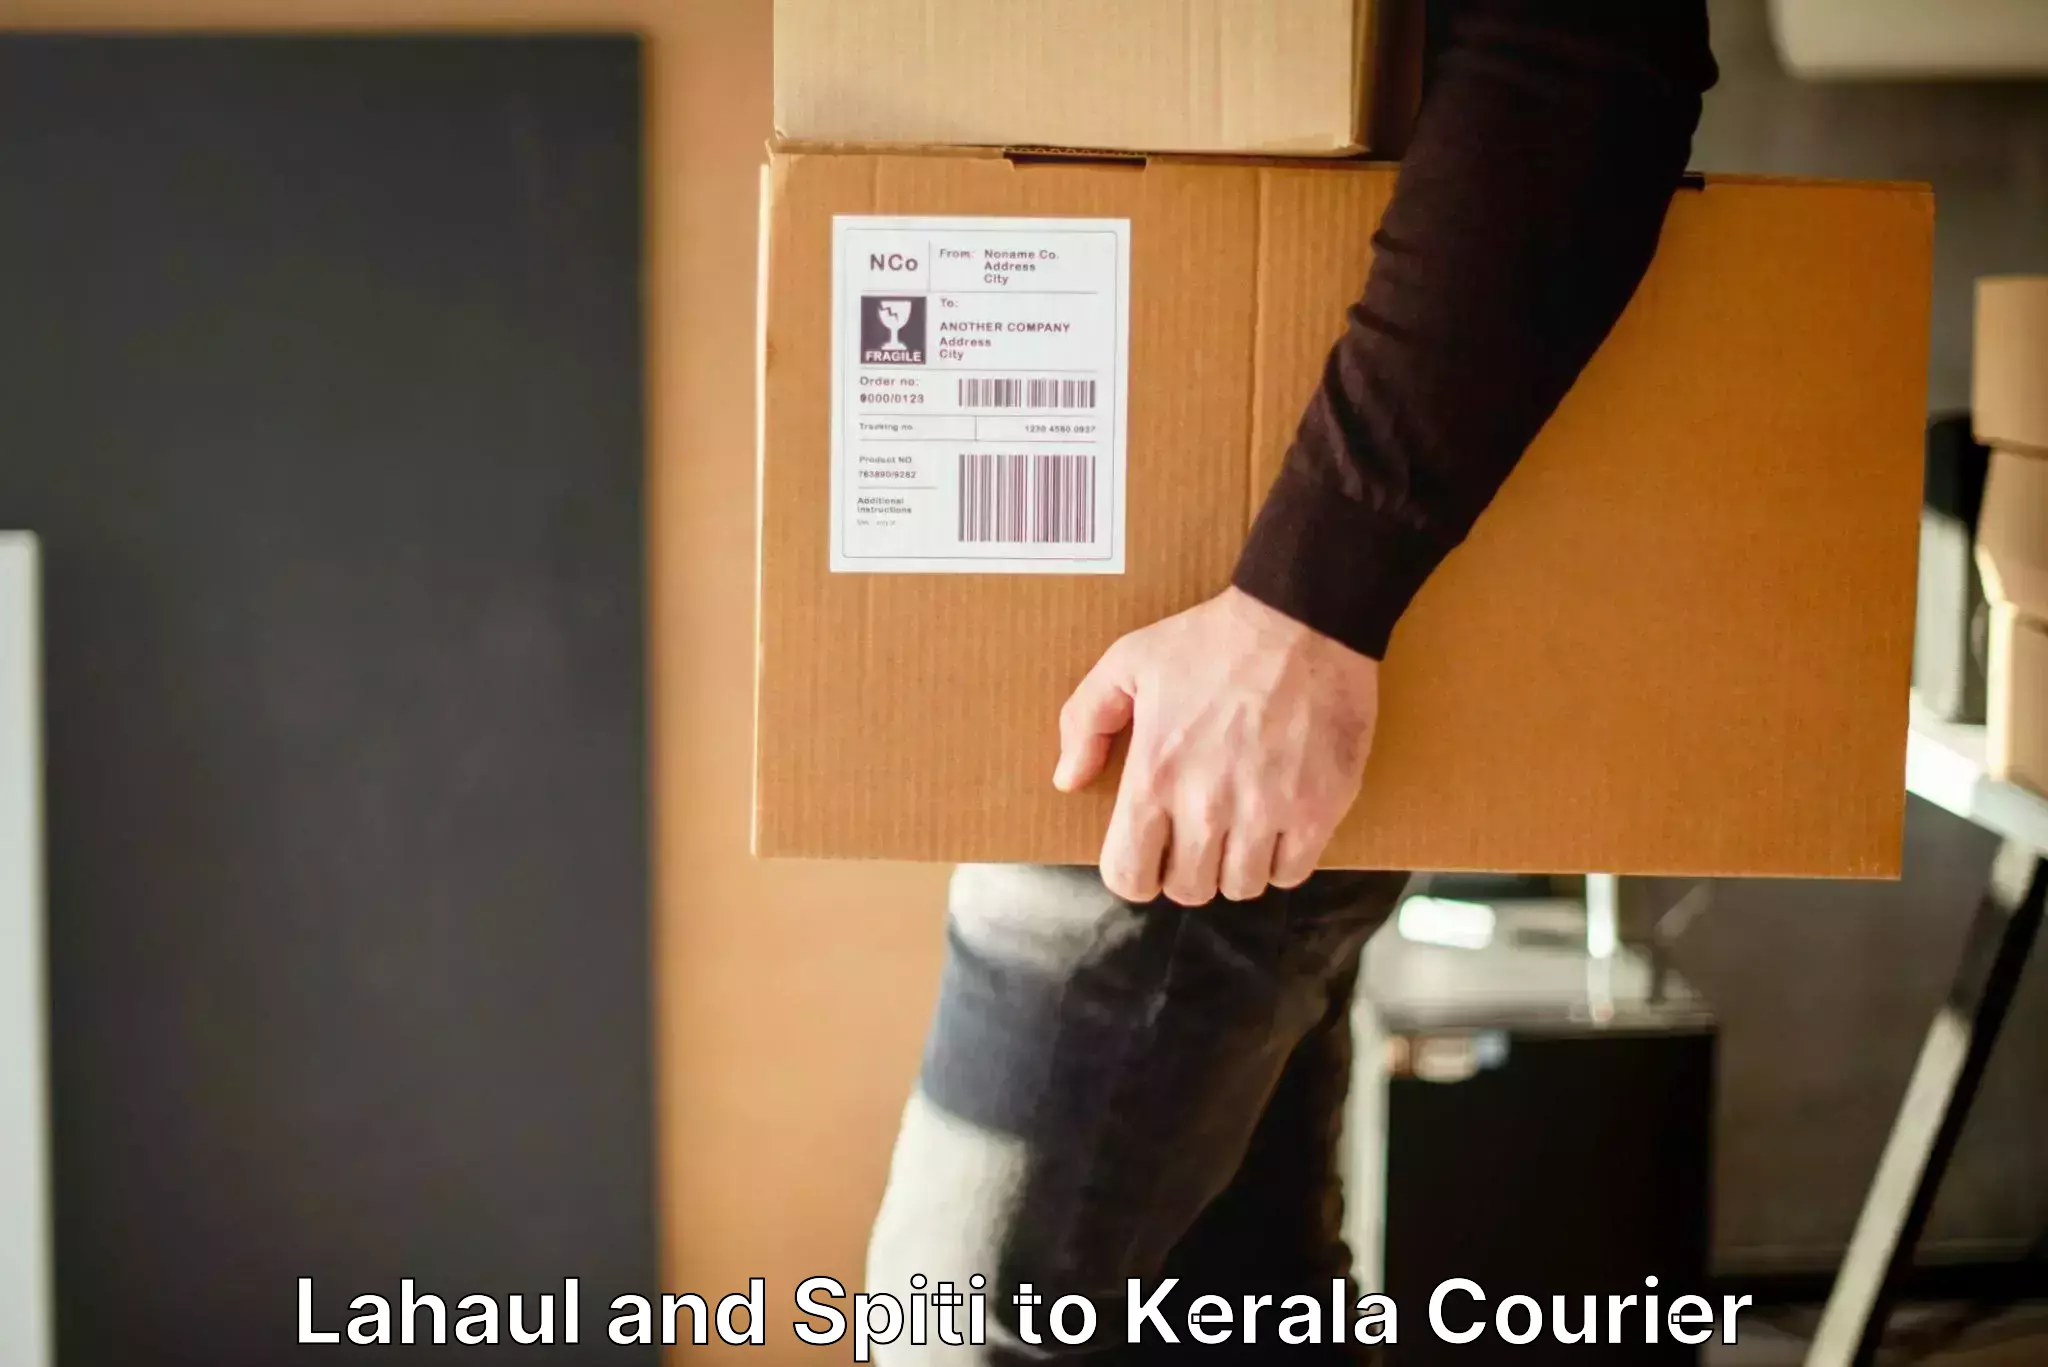 Baggage relocation service Lahaul and Spiti to Palakkad